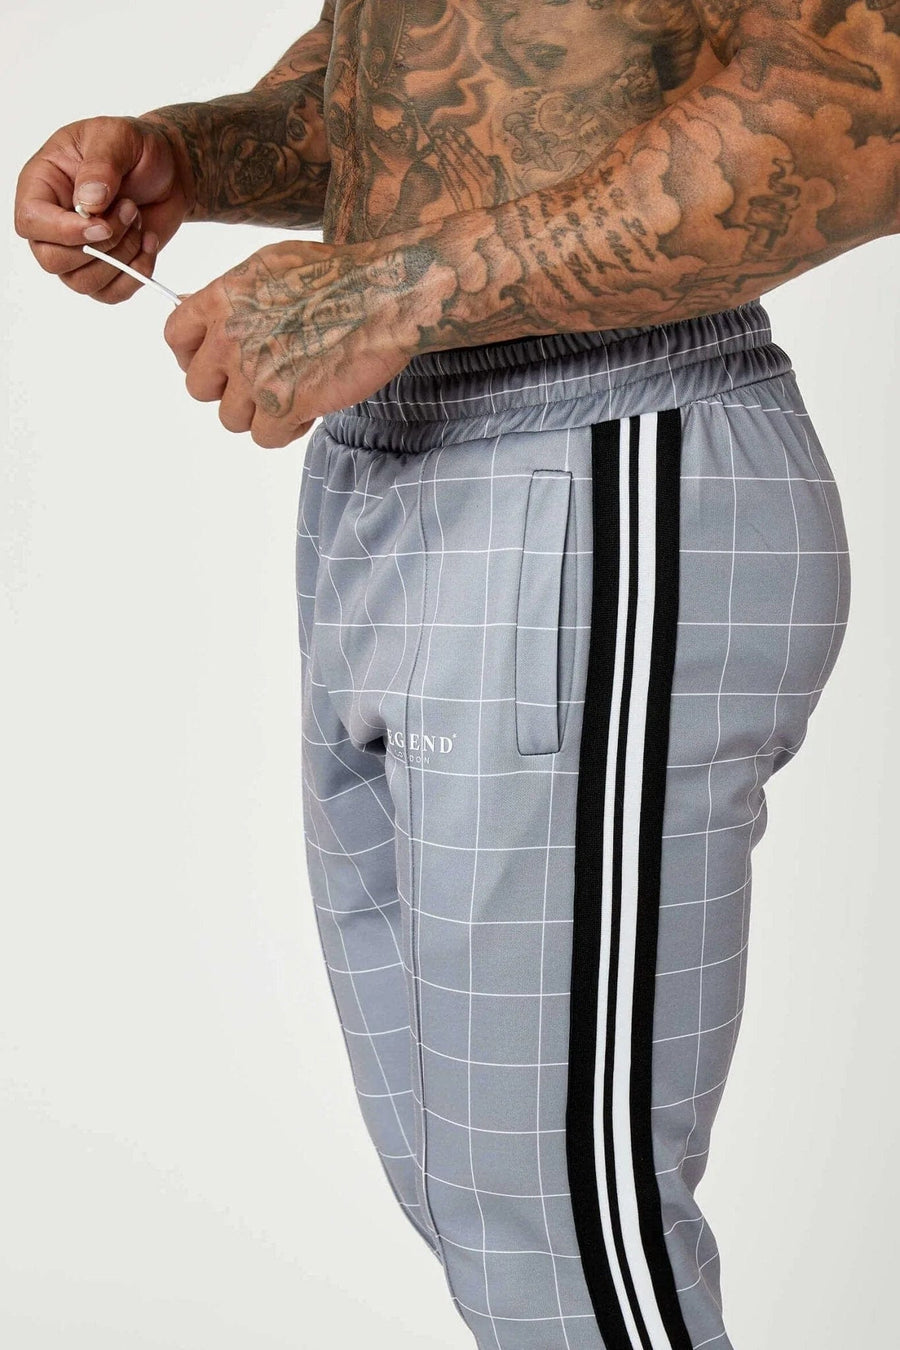 Legend London Tracksuits Tracksuit Jogger In Windowpane Check - Grey